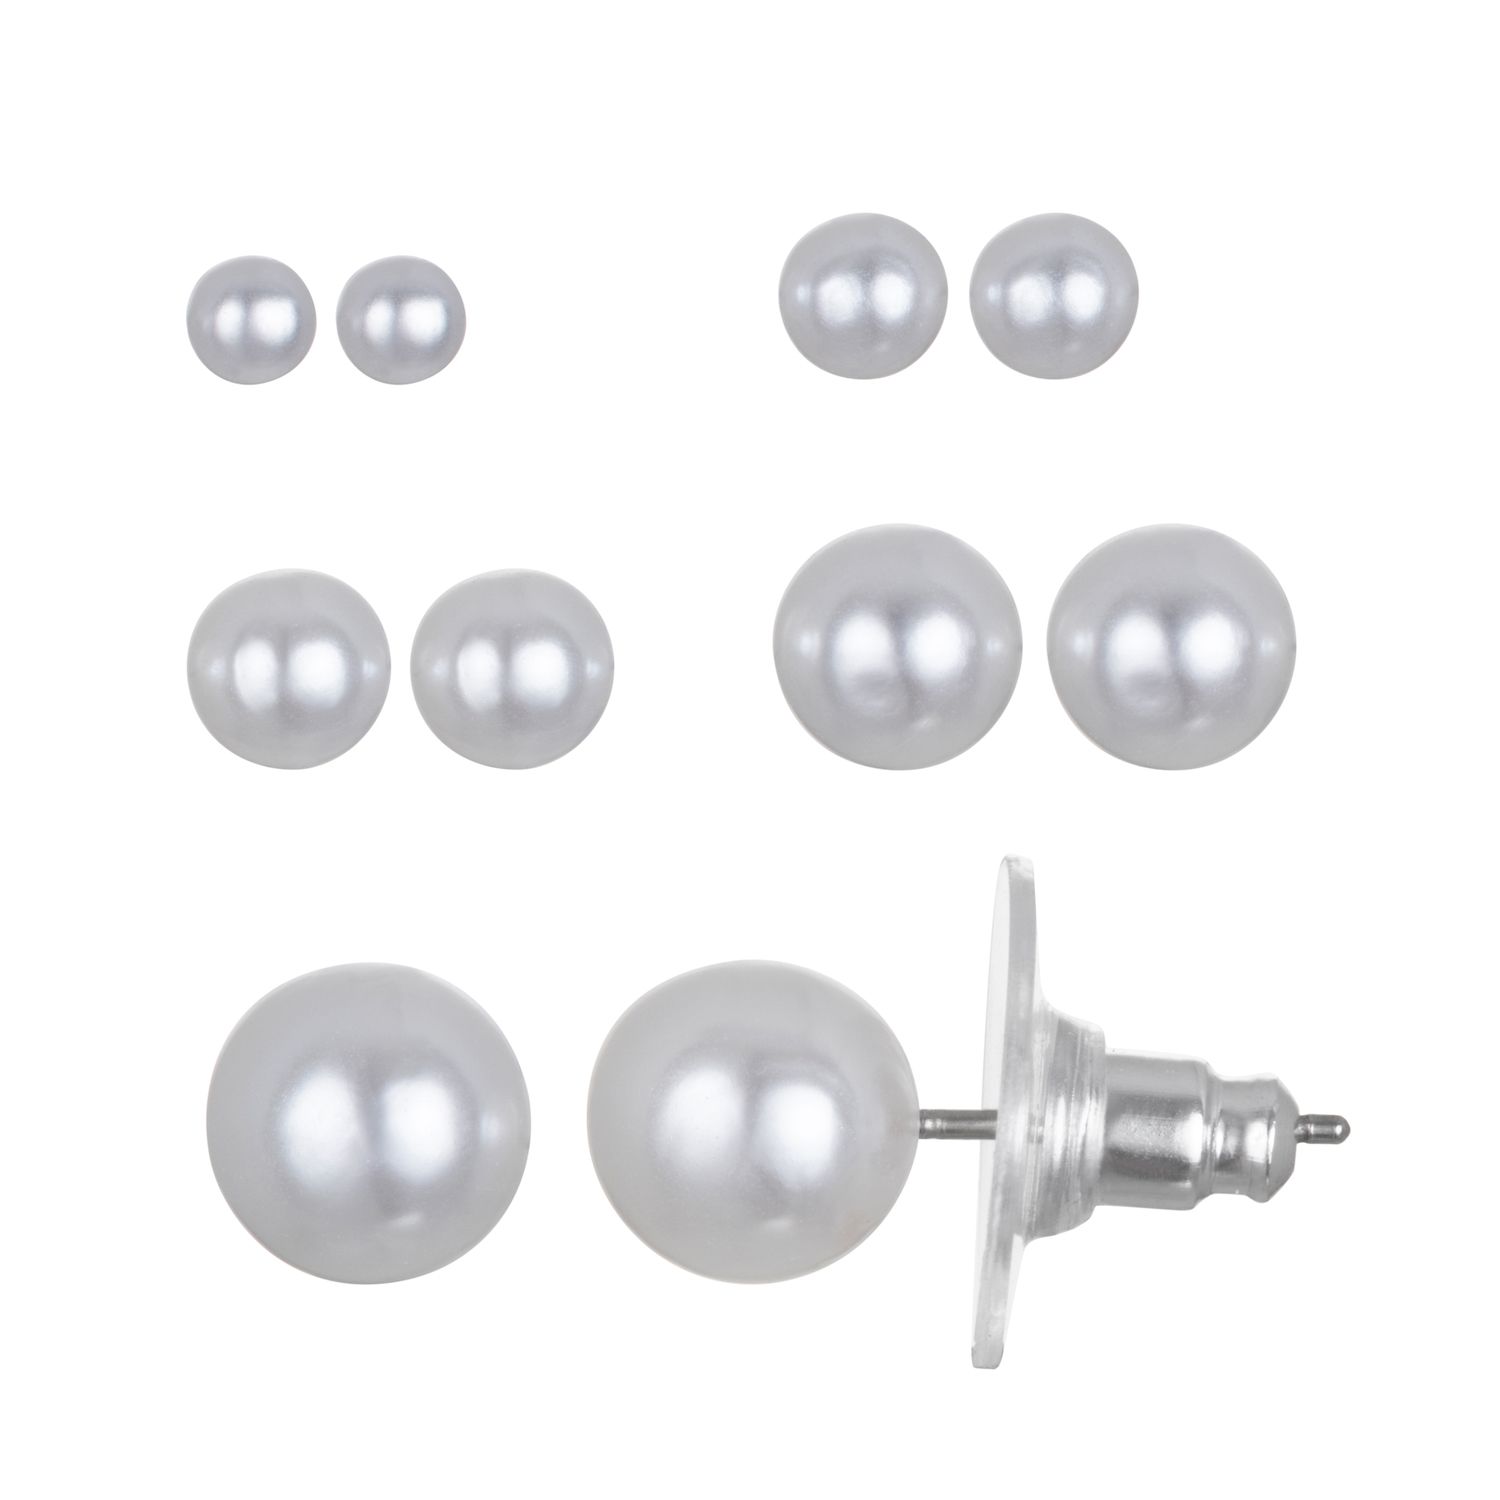 Image for LC Lauren Conrad Simulated Pearl Stud Earring Set at Kohl's.